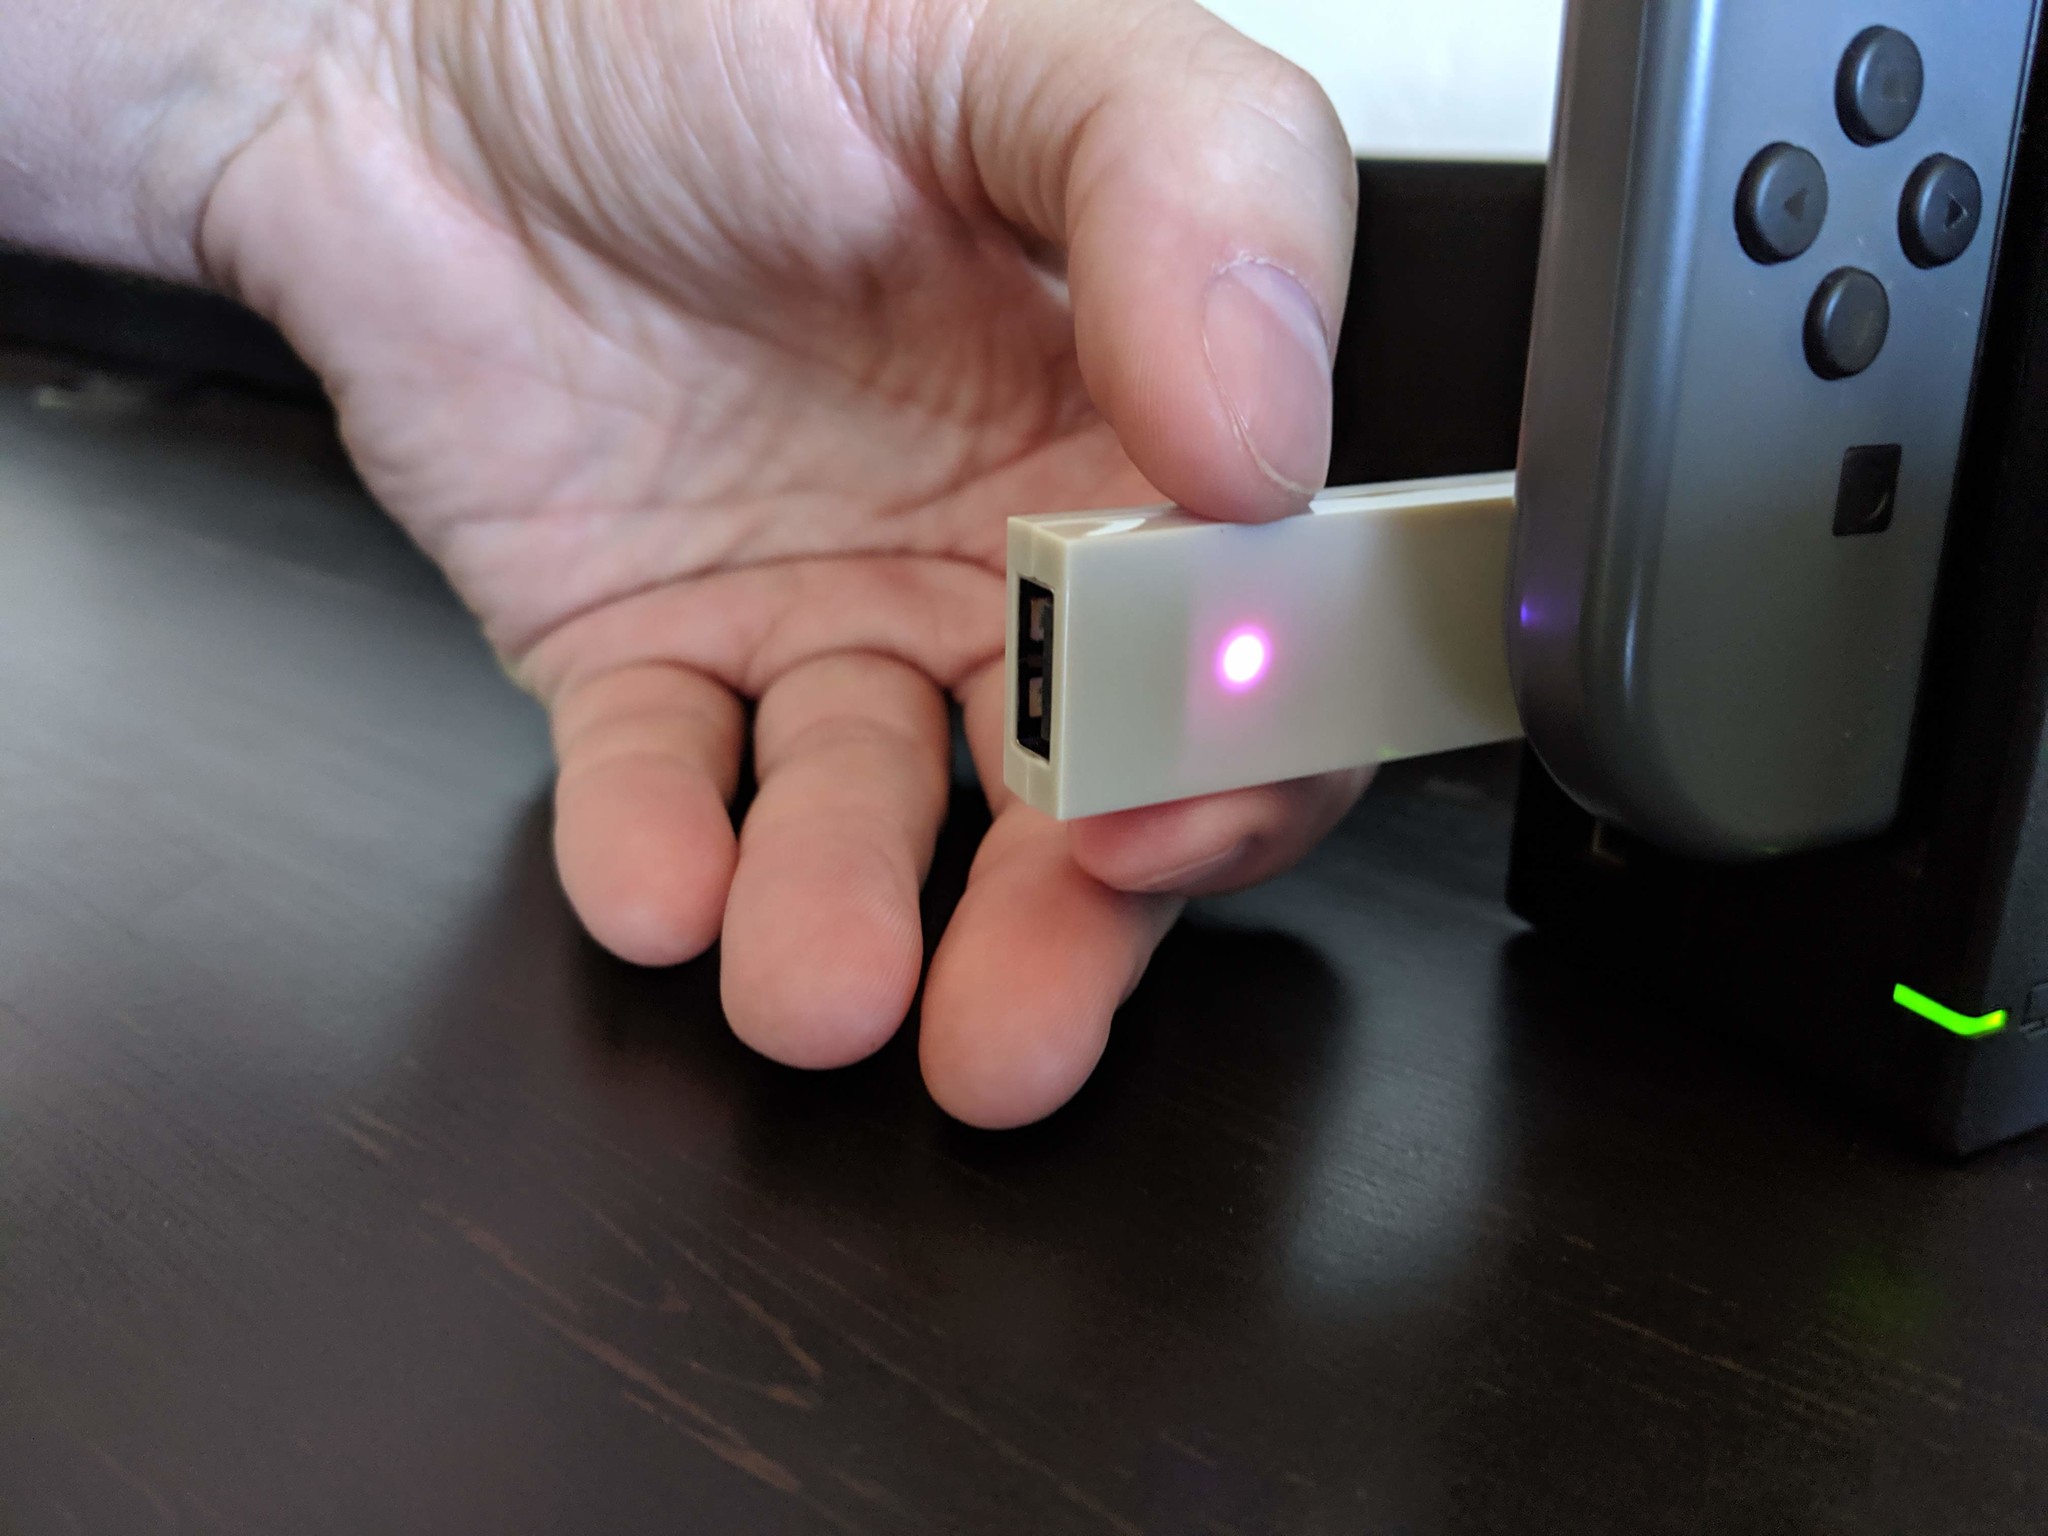 How to connect your Xbox One controller with the Nintendo Switch in wireless docked mode step three: Quickly press and release the small black button to make the LED flash faster